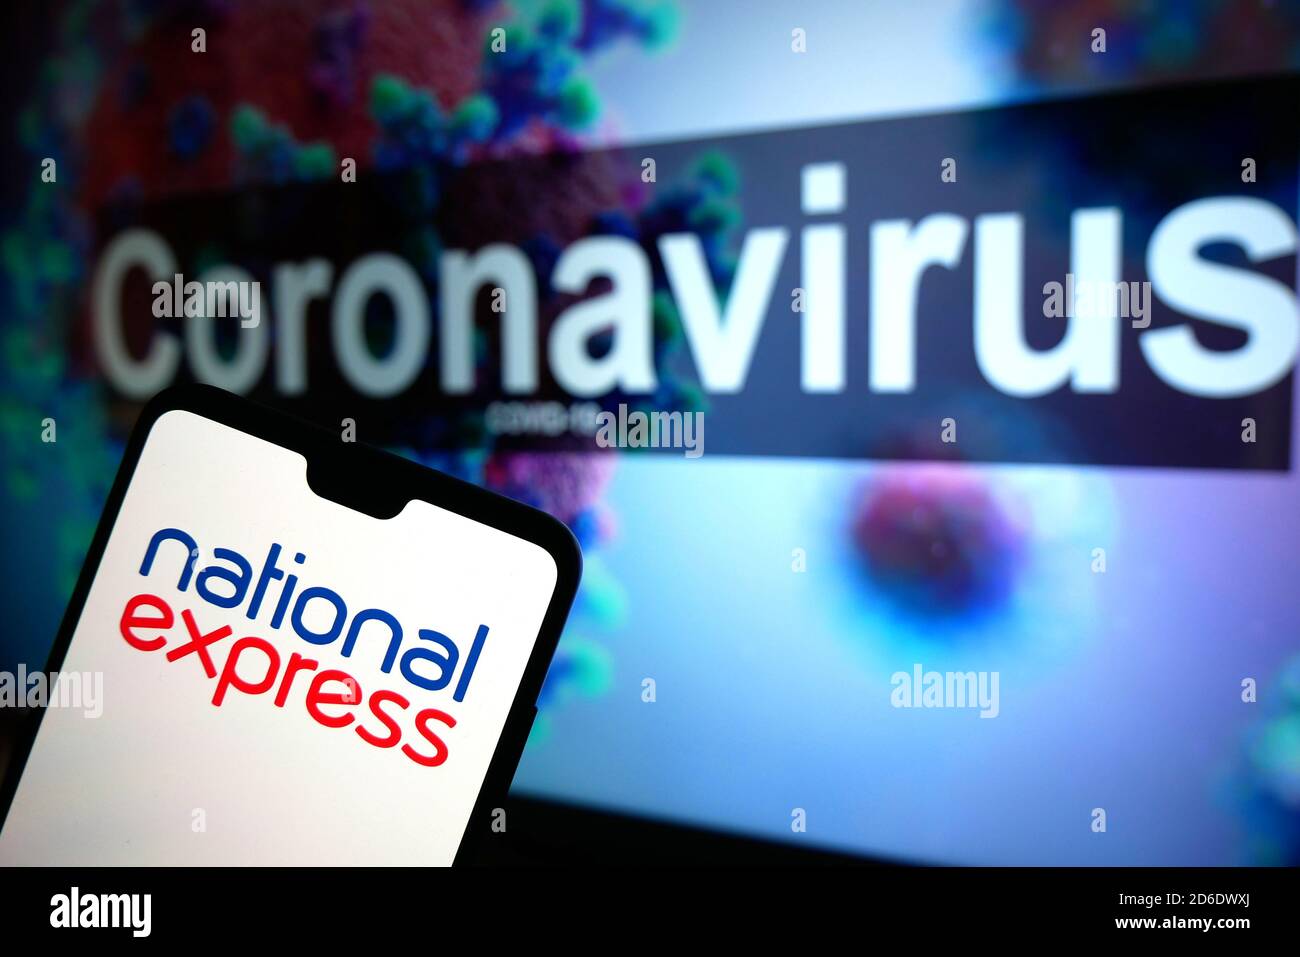 The National Express logo seen displayed on a mobile phone with an illustrative model of the Coronavirus displayed on a monitor in the background. Stock Photo